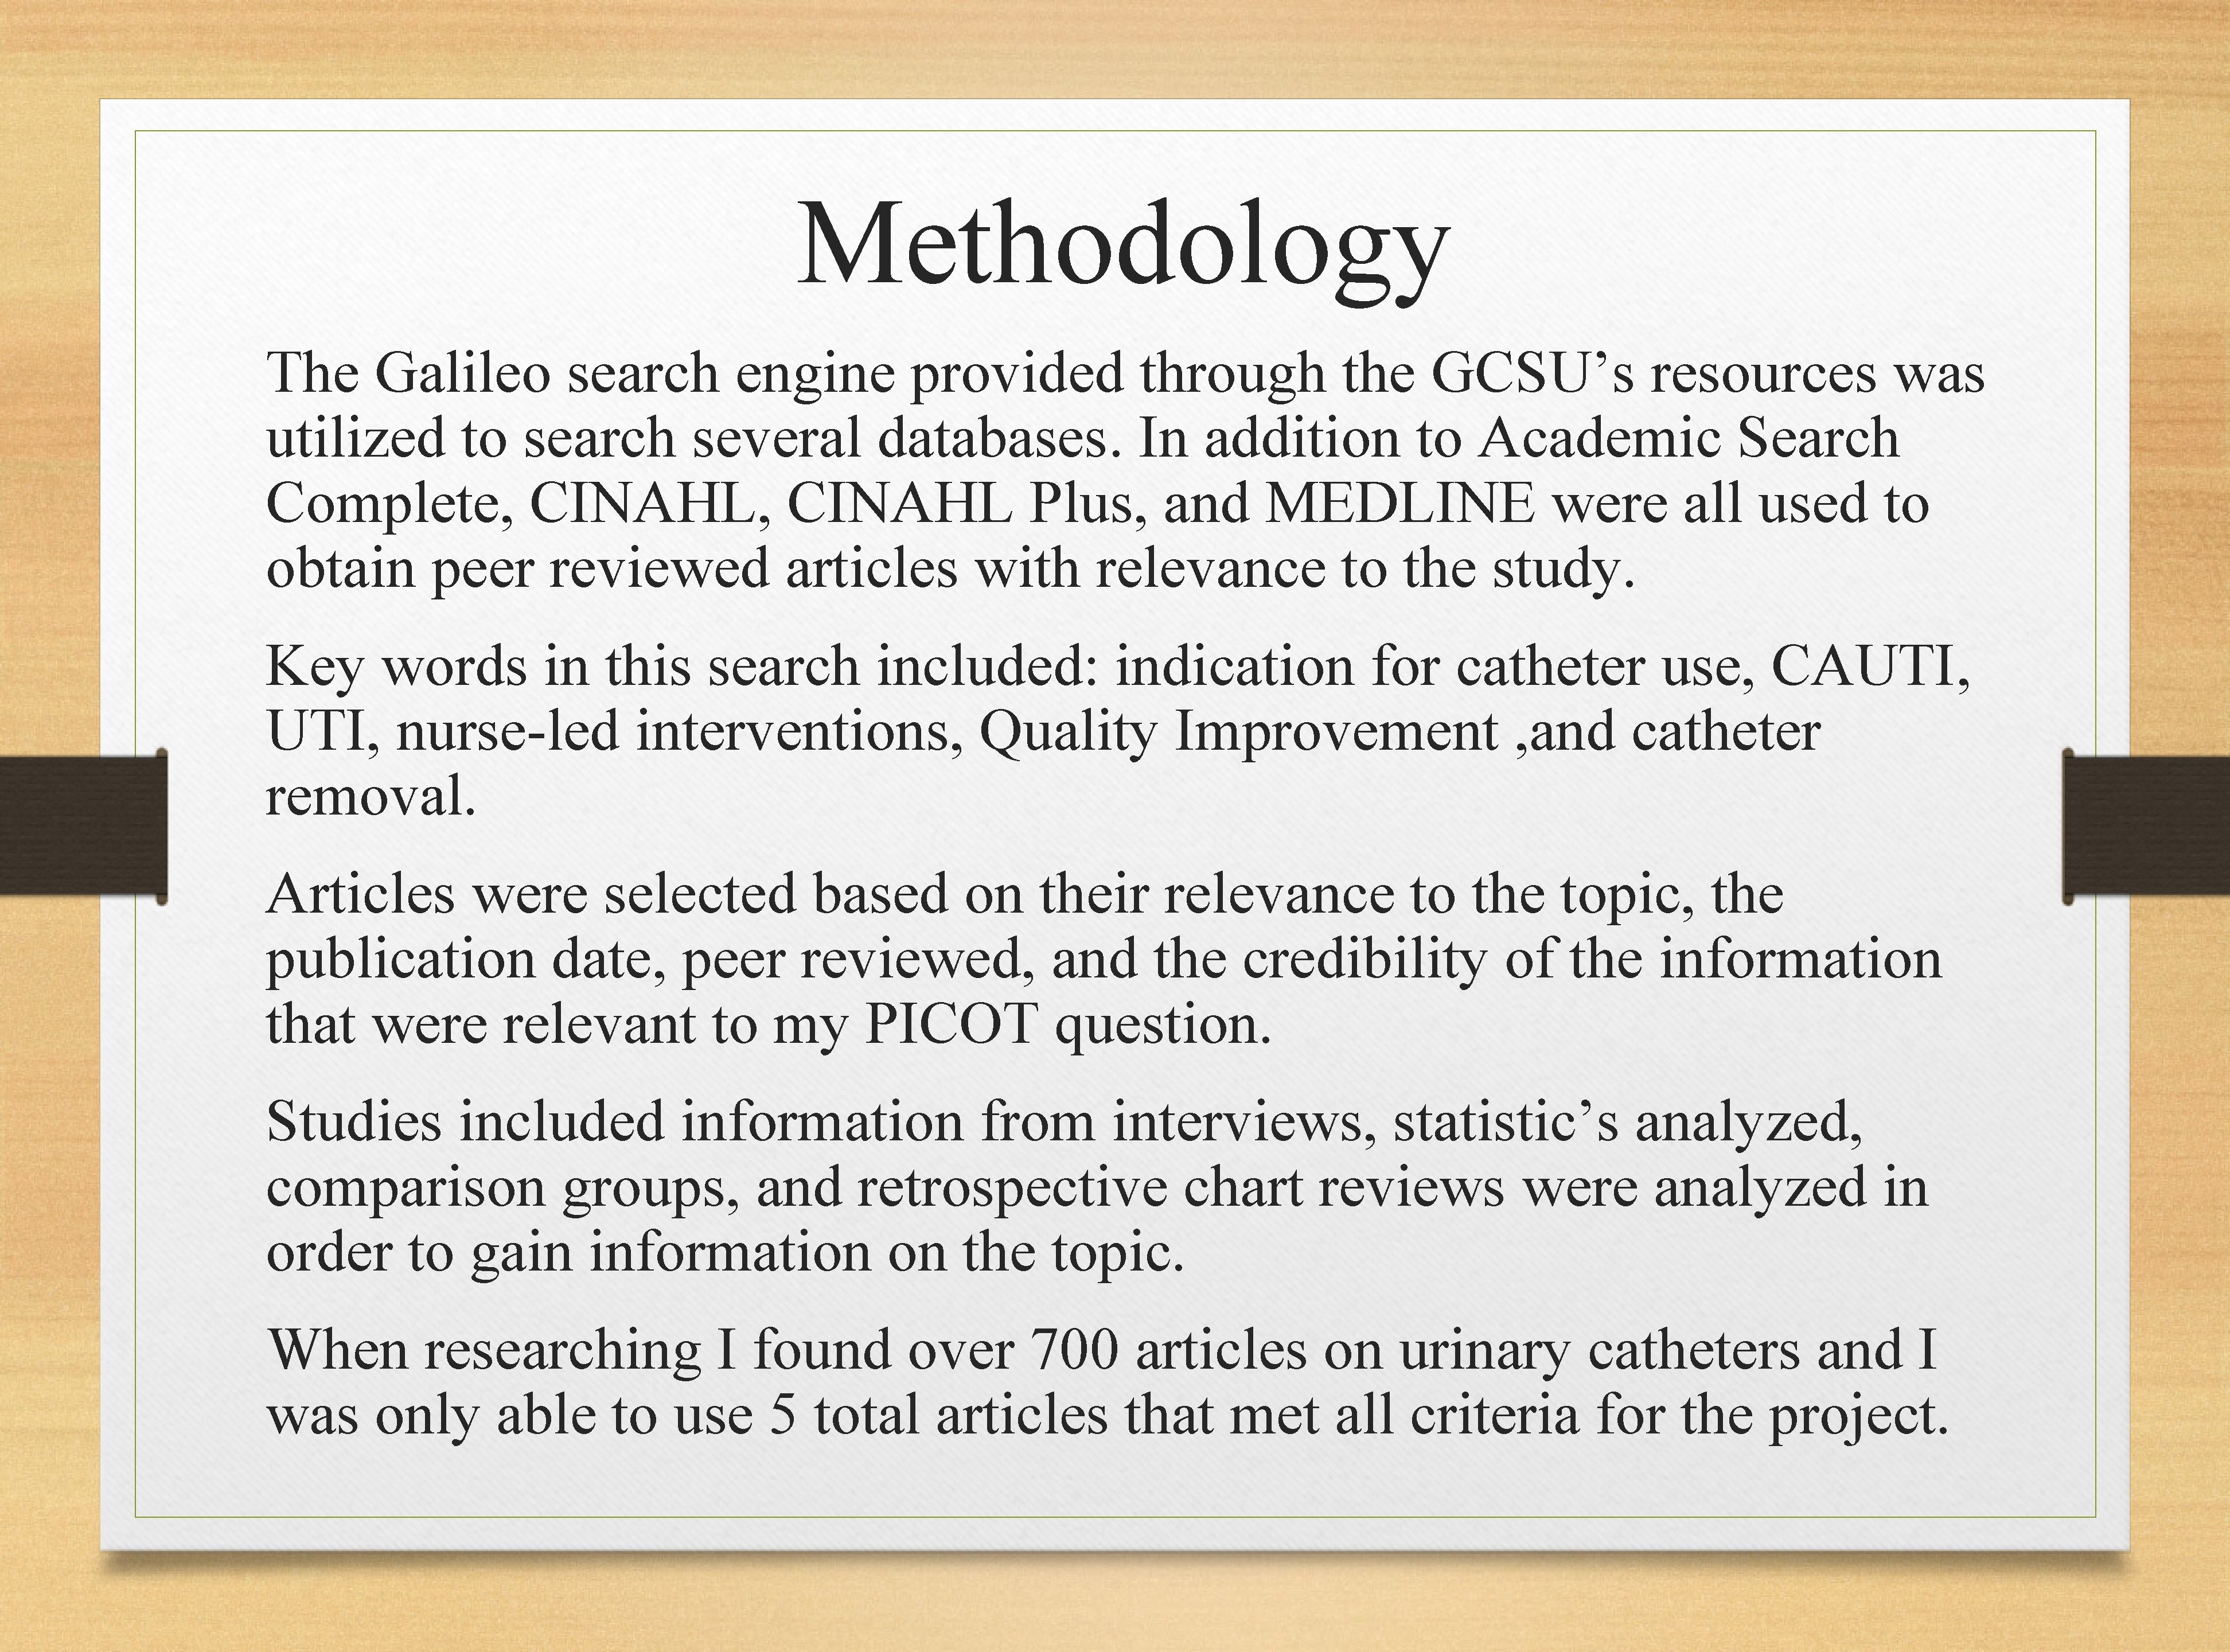 Methodology The Galileo search engine provided through the GCSU’s resources was utilized to search